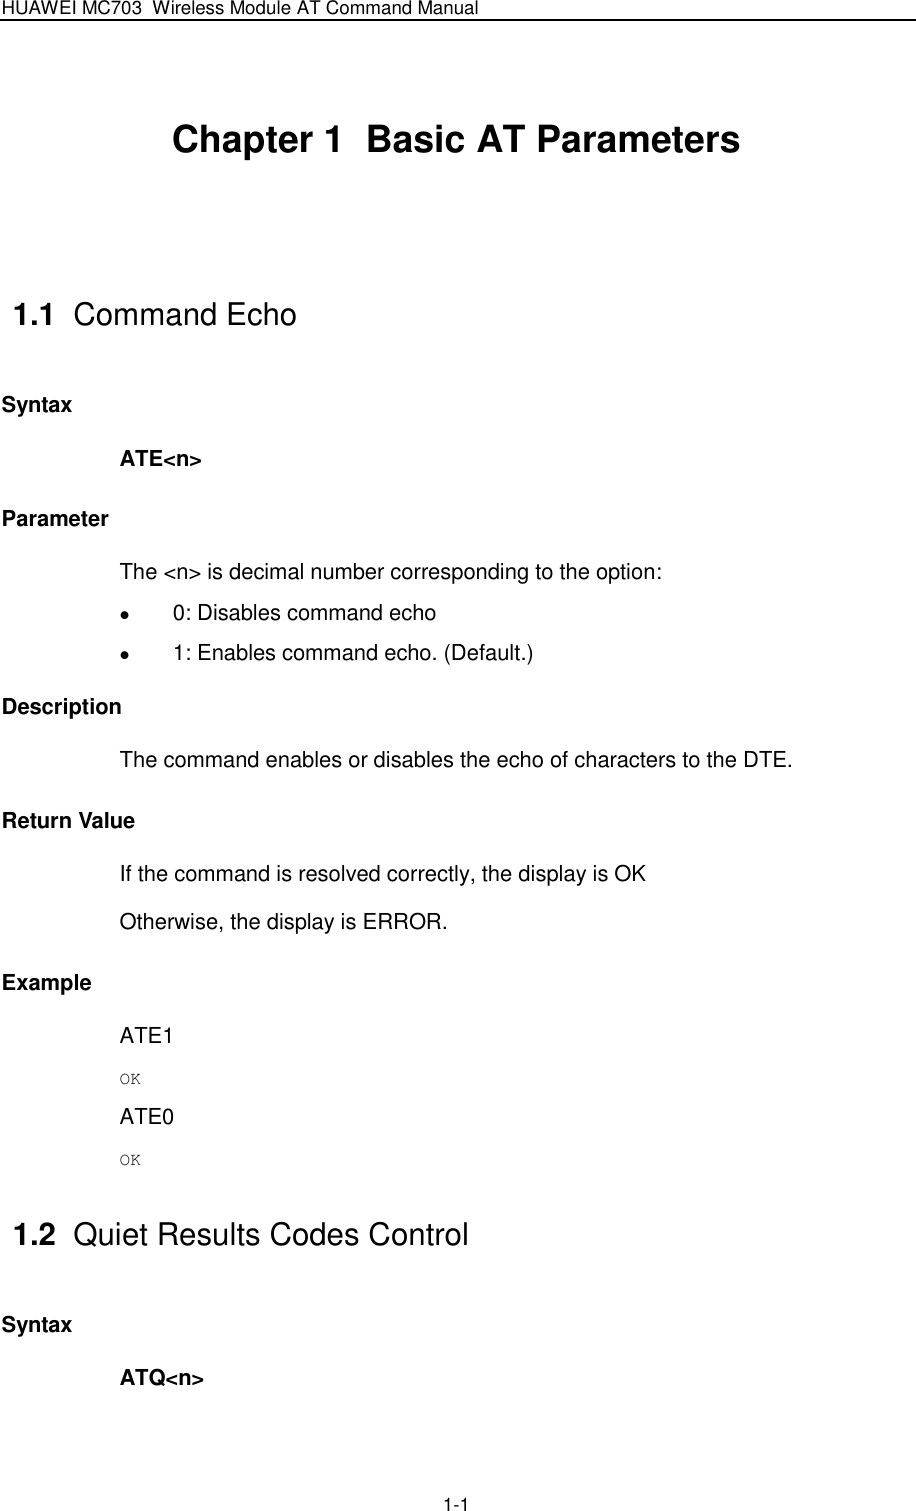 HUAWEI MC703 Wireless Module AT Command Manual   1-1 Chapter 1  Basic AT Parameters  1.1  Command Echo Syntax ATE&lt;n&gt; Parameter The &lt;n&gt; is decimal number corresponding to the option:    0: Disables command echo  1: Enables command echo. (Default.) Description The command enables or disables the echo of characters to the DTE. Return Value If the command is resolved correctly, the display is OK Otherwise, the display is ERROR. Example ATE1 OK ATE0 OK 1.2  Quiet Results Codes Control Syntax ATQ&lt;n&gt; 